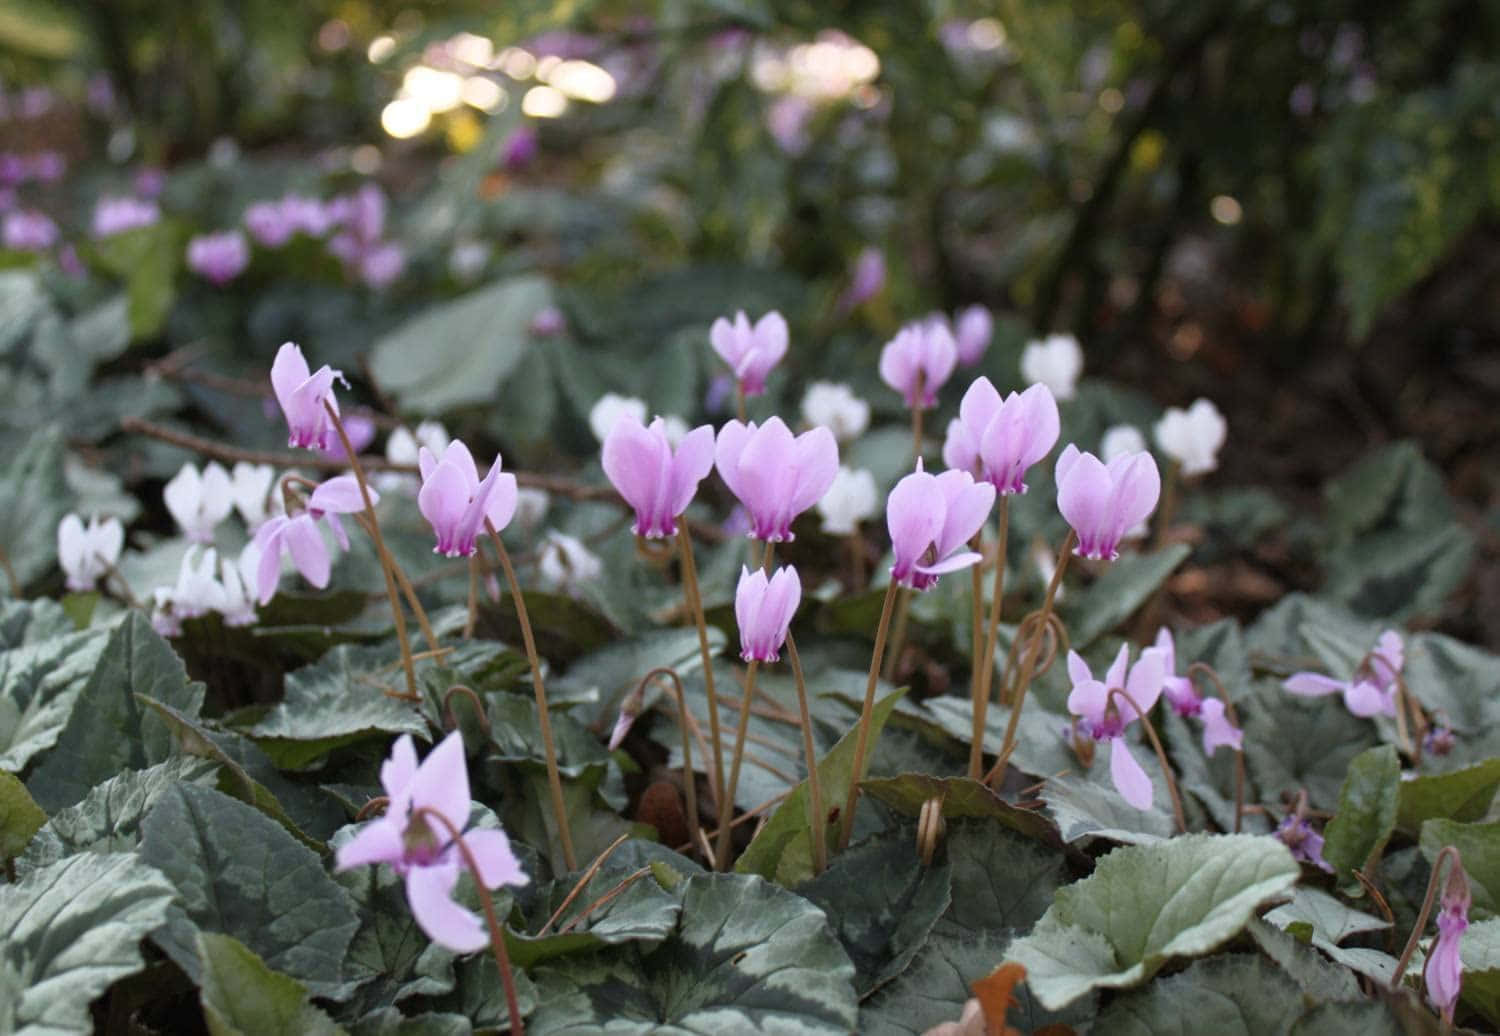 “A delicate and vibrant Cyclamen flower in full bloom”